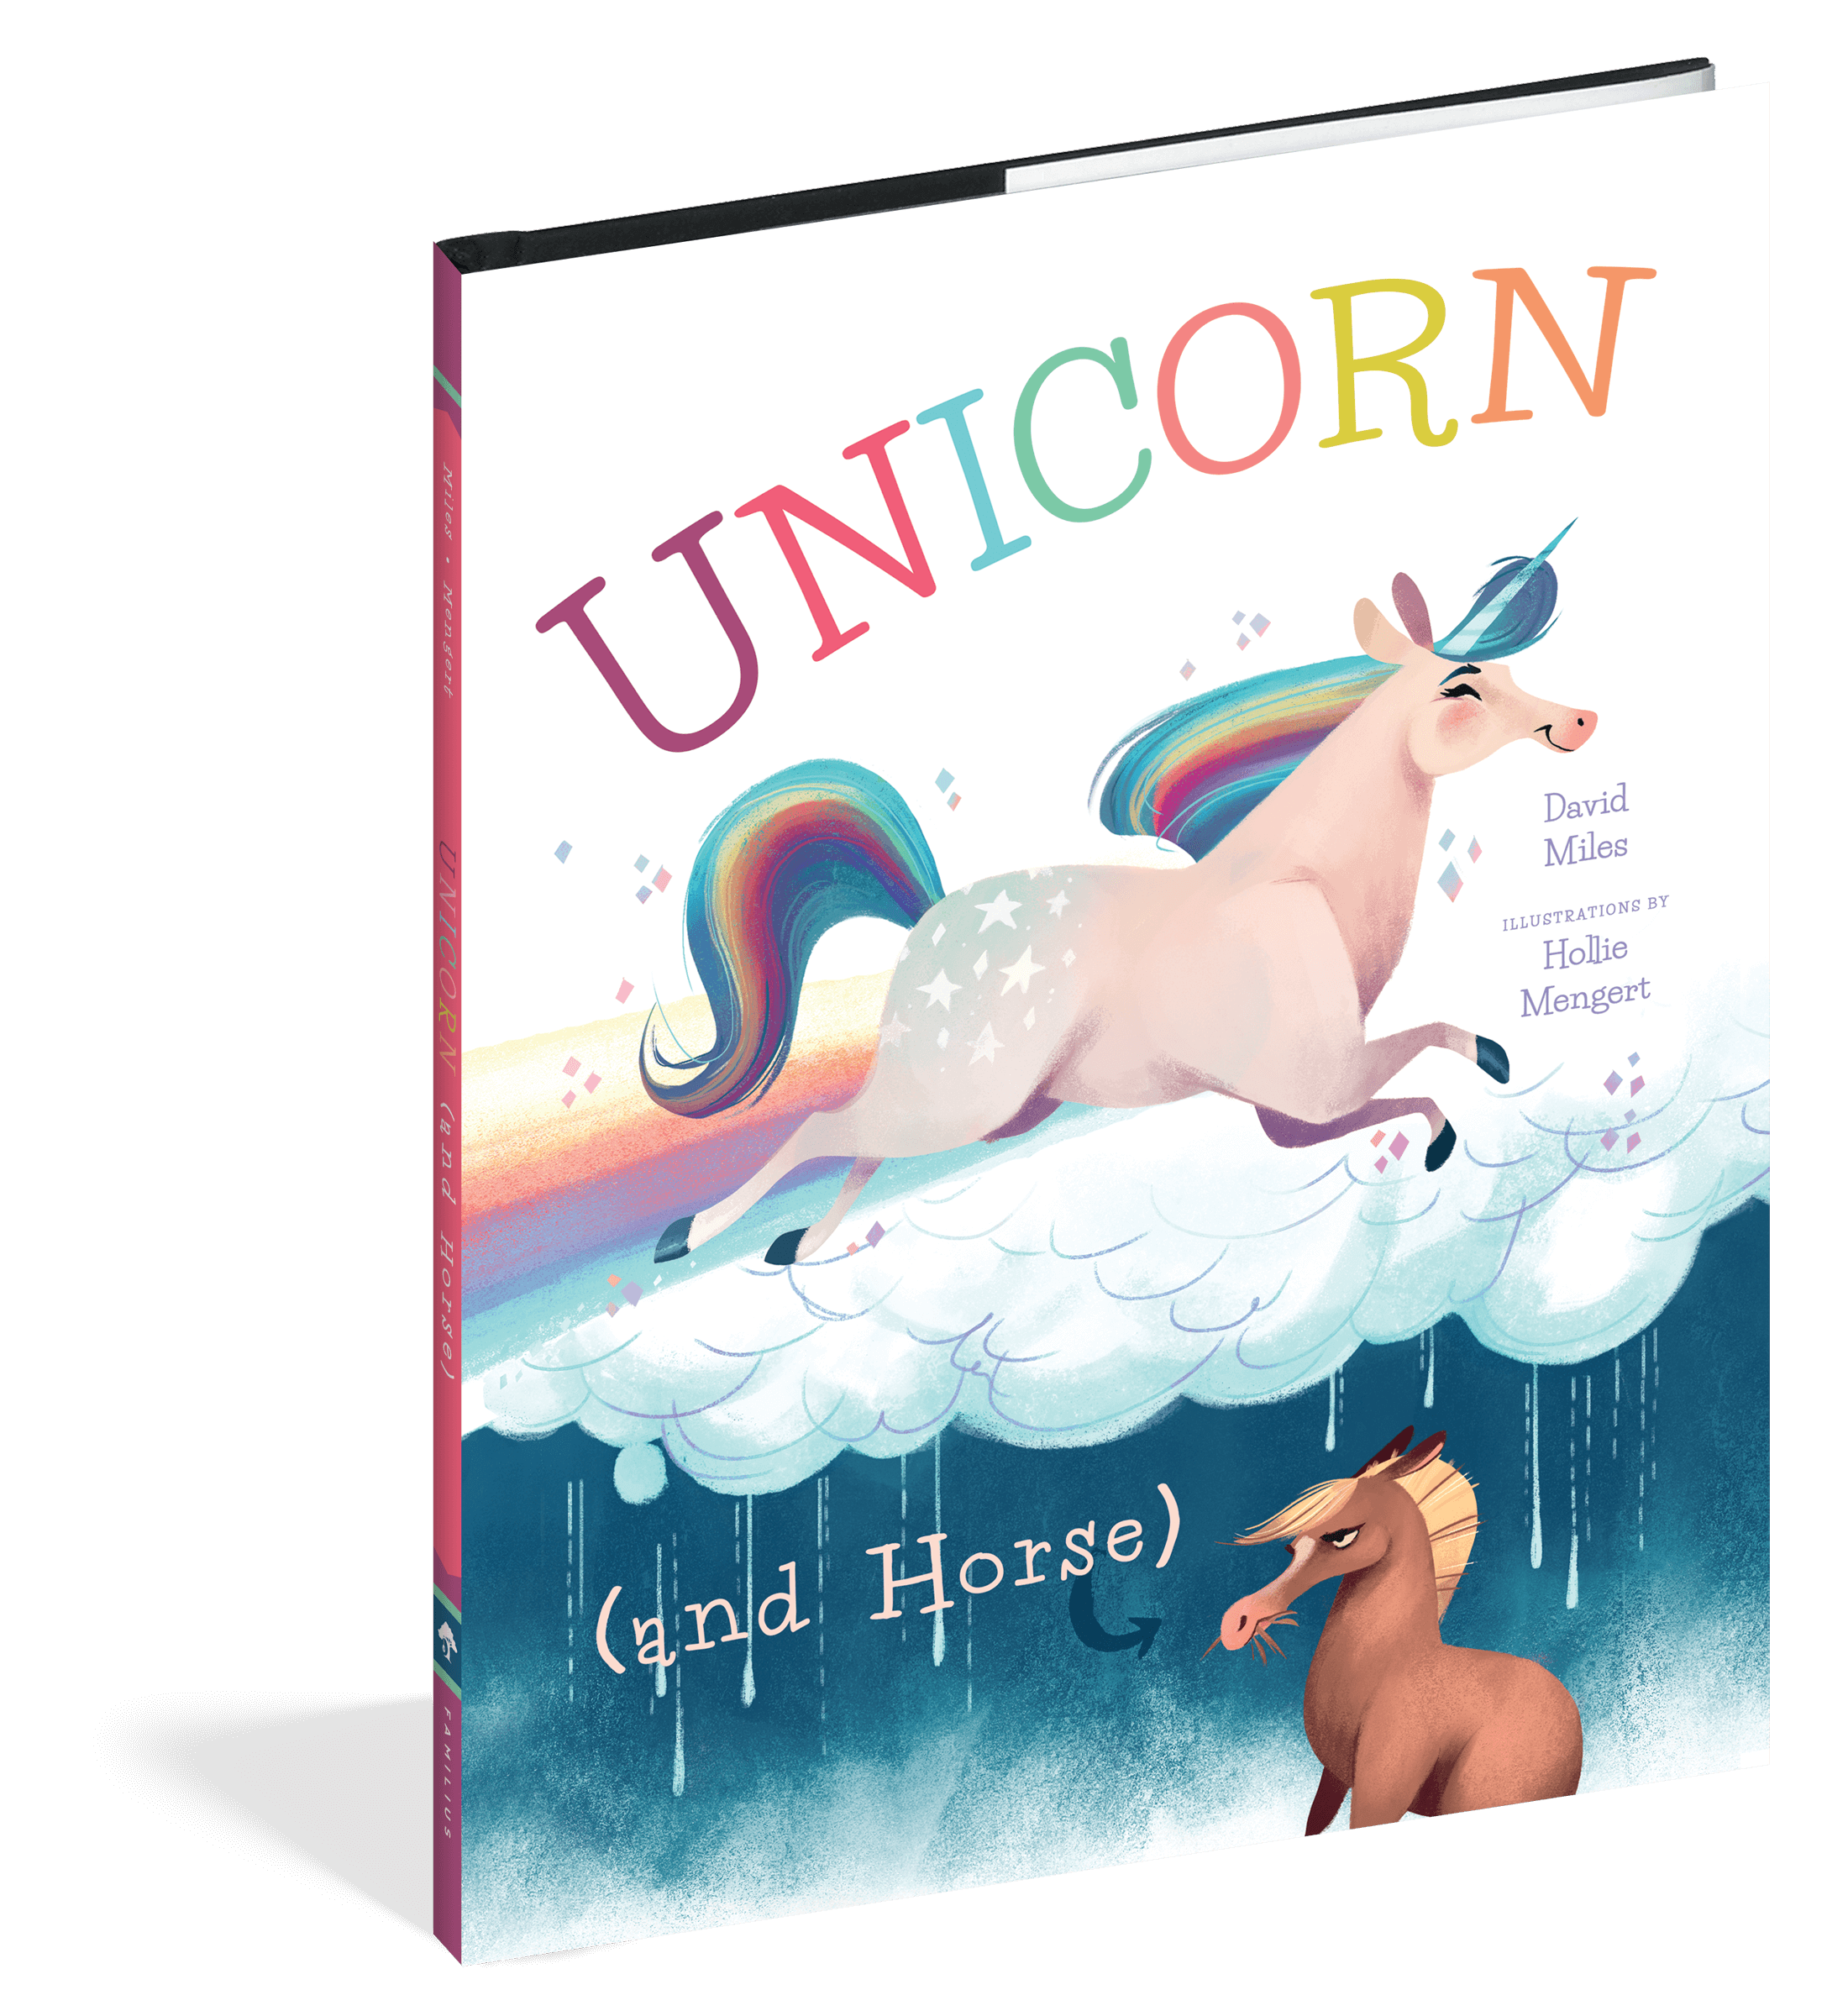 The cover of the picture book Unicorn and Horse.